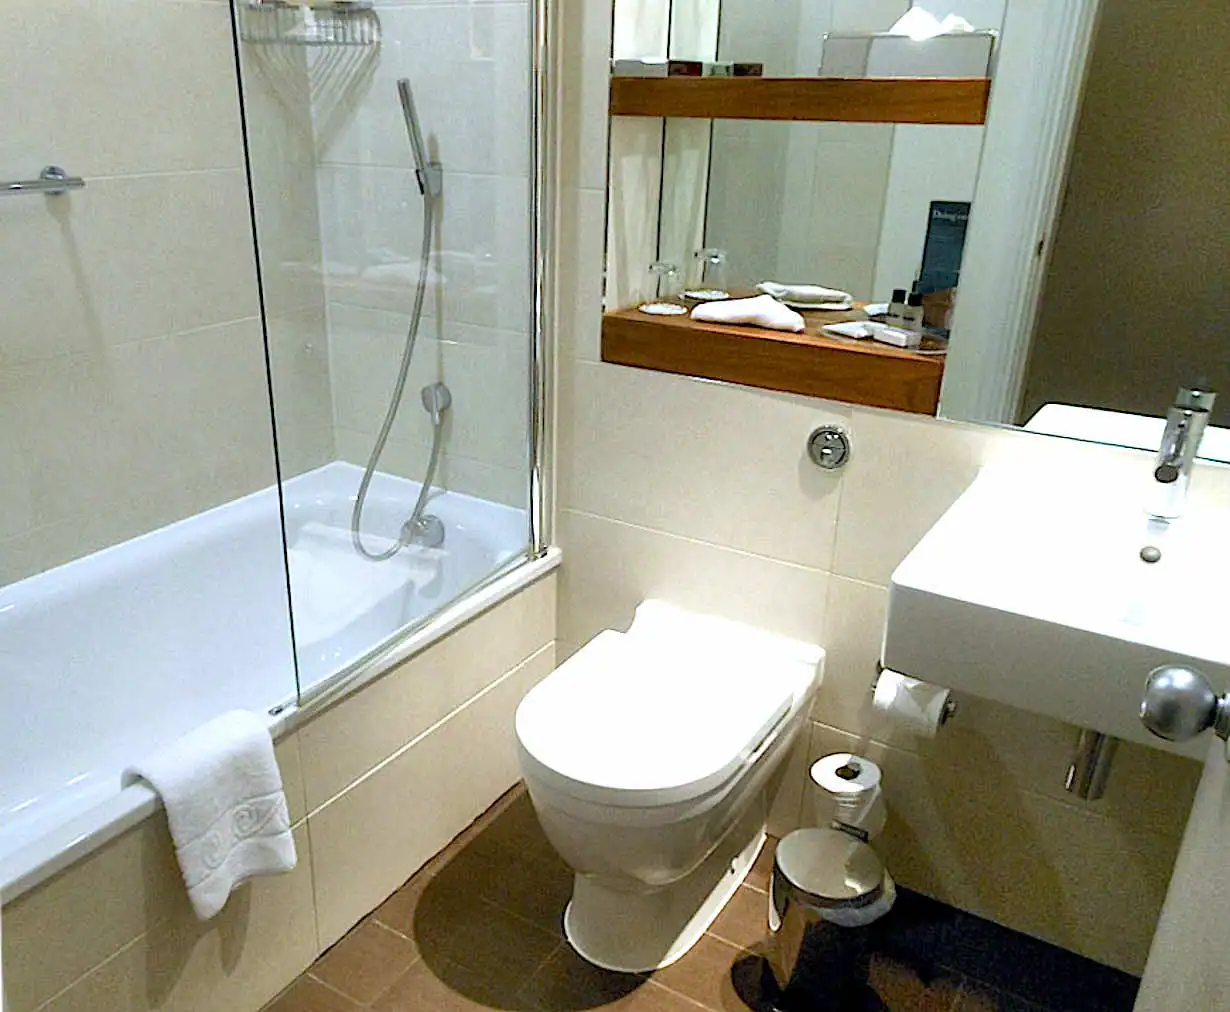 Ensuite bathroom at the Thistle Holborn